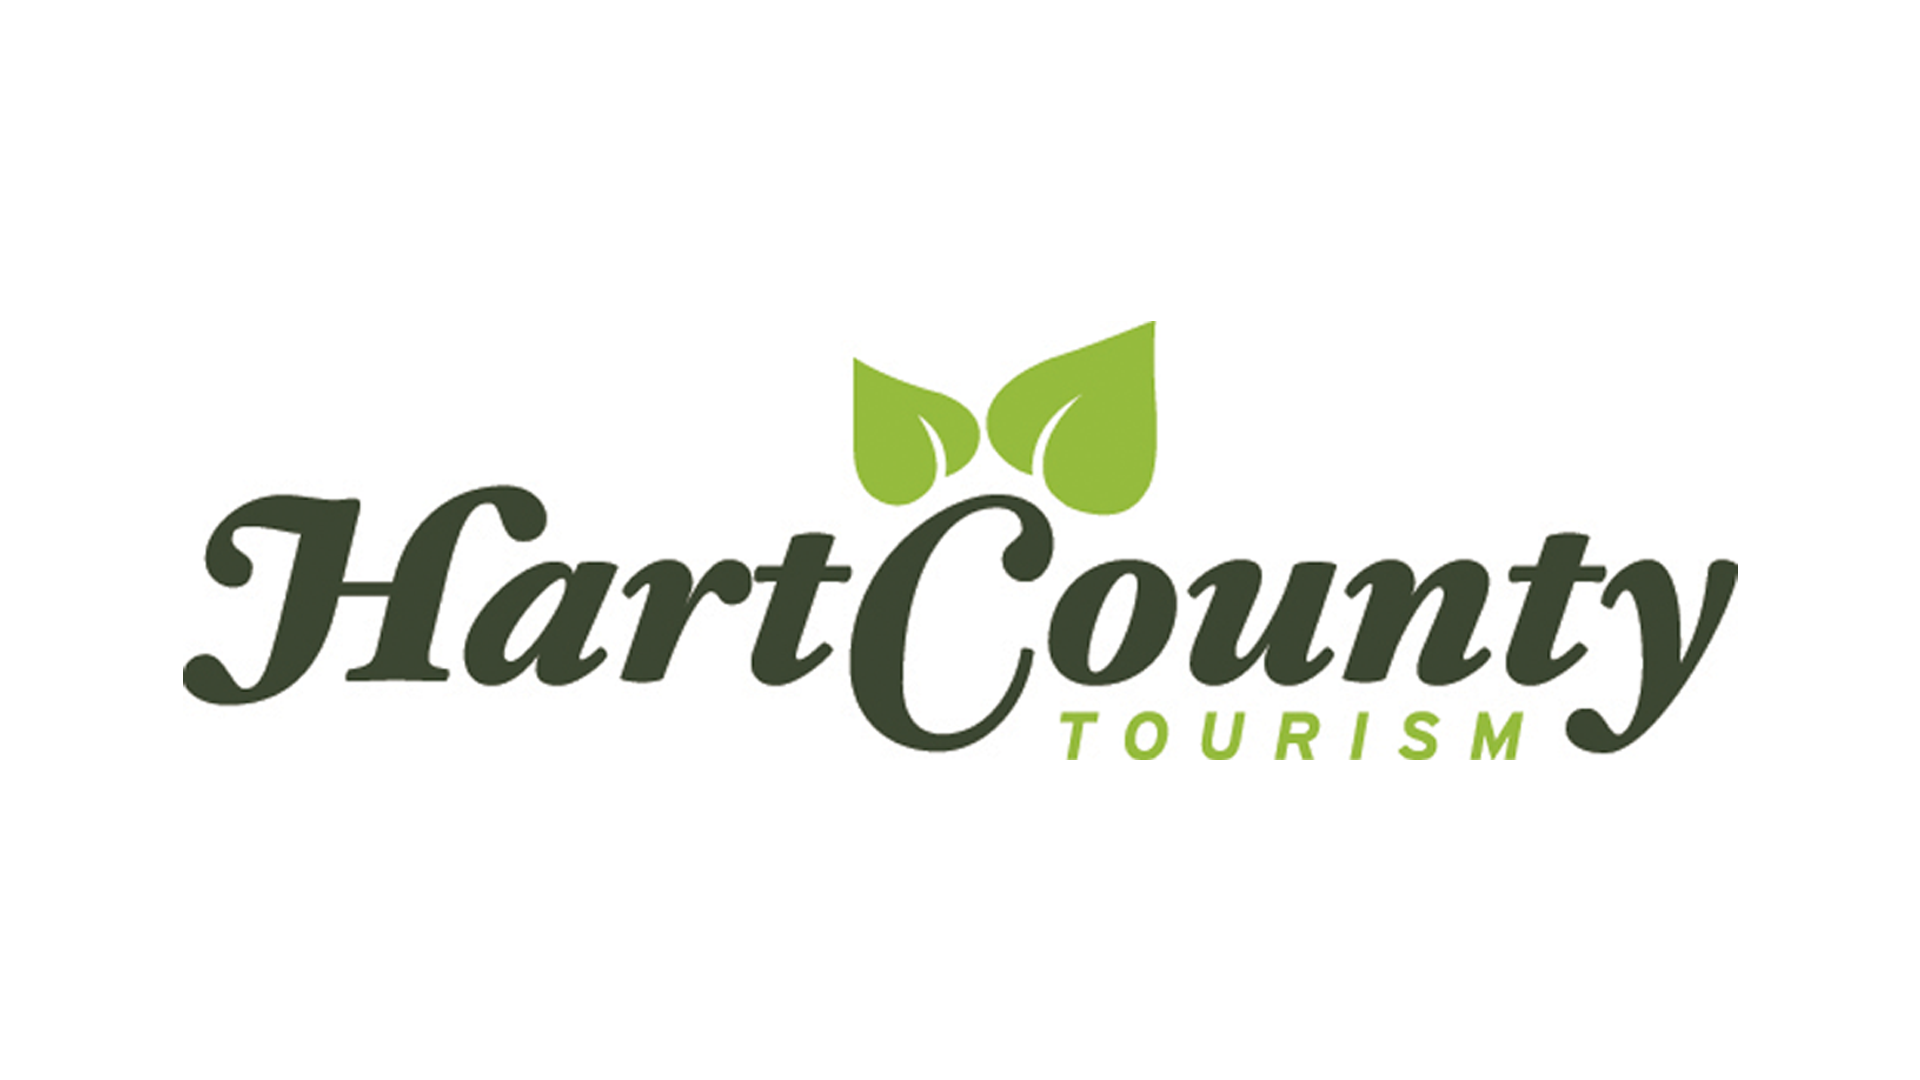 Hart County Tourism